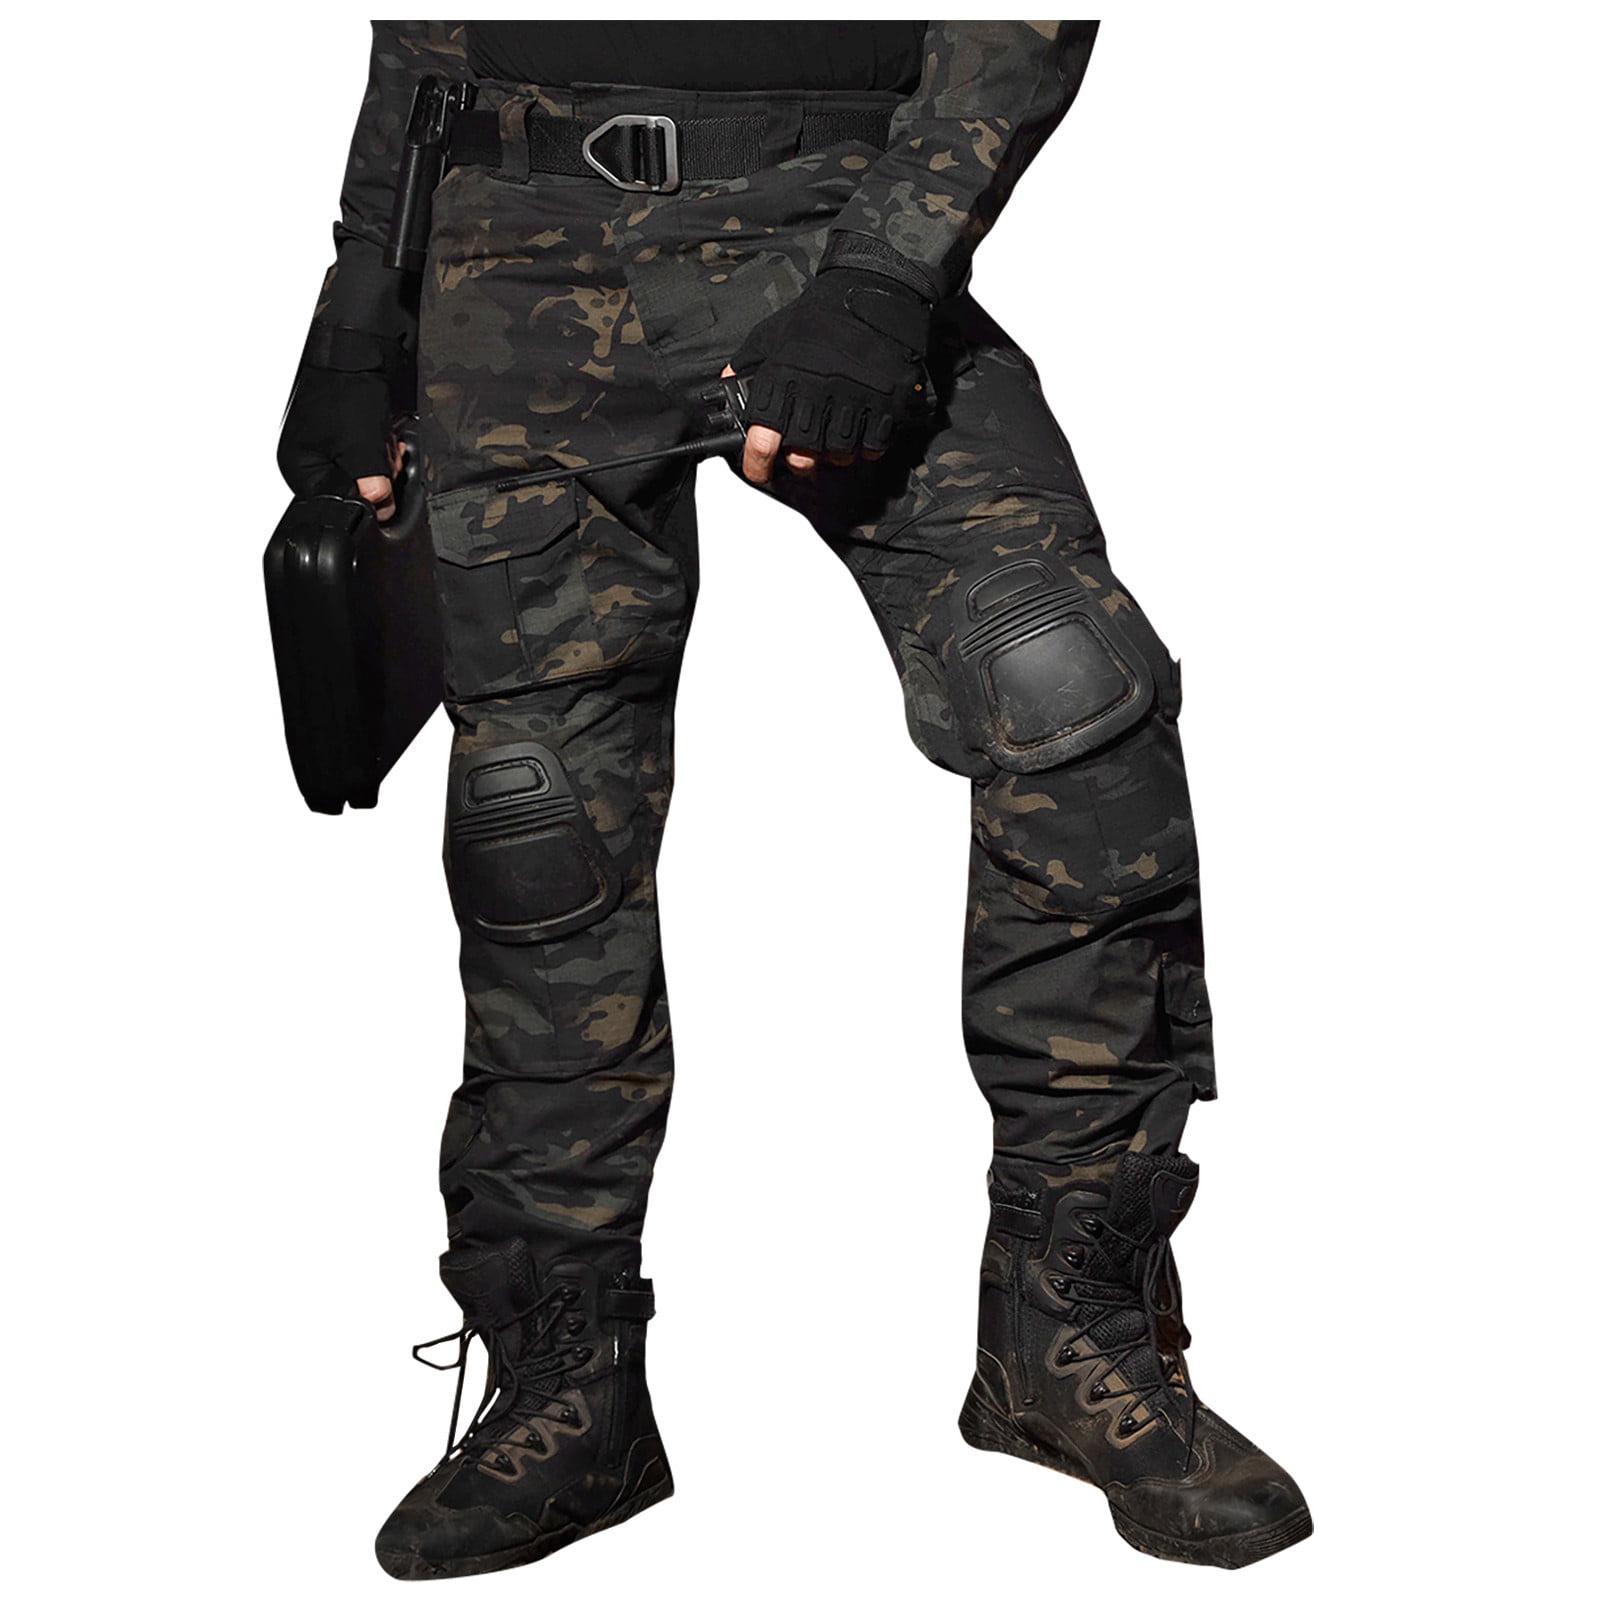  YUANBOO Khaki Casual Pants Men Military Tactical Joggers  Camouflage Cargo Pants Multi-Pocket Fashions Black Army Trousers (Color :  Grass Green, Size : 36) : ביגוד, נעליים ותכשיטים